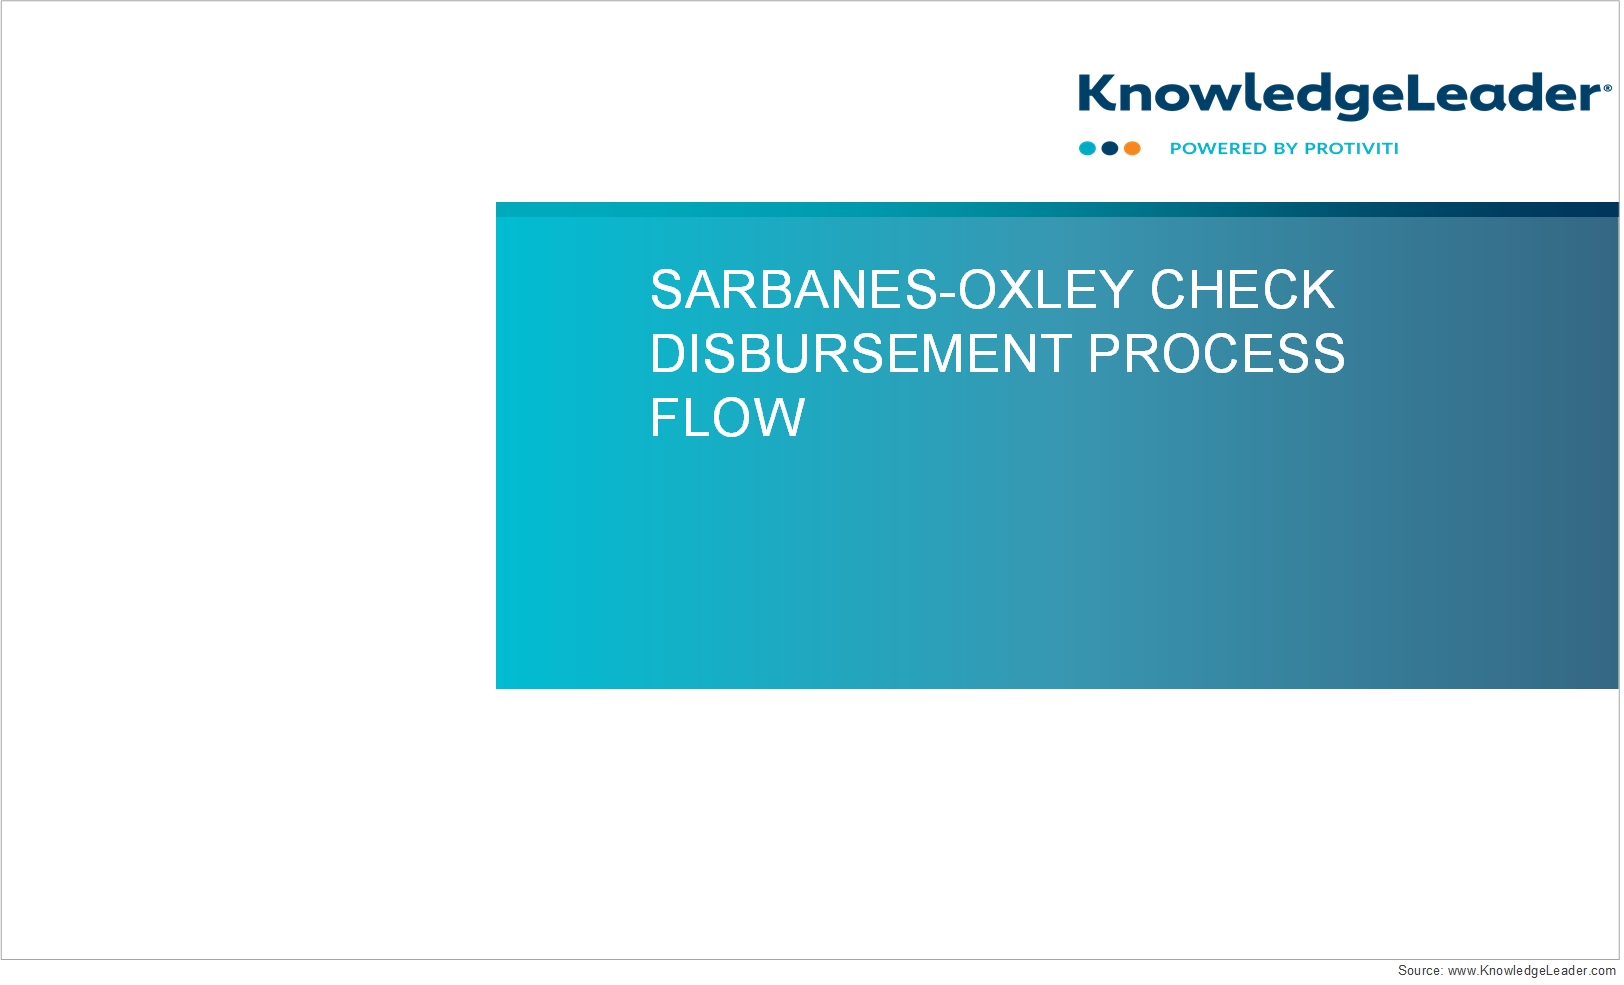 Screenshot of the first page of Sarbanes-Oxley Check Disbursement Process Flow